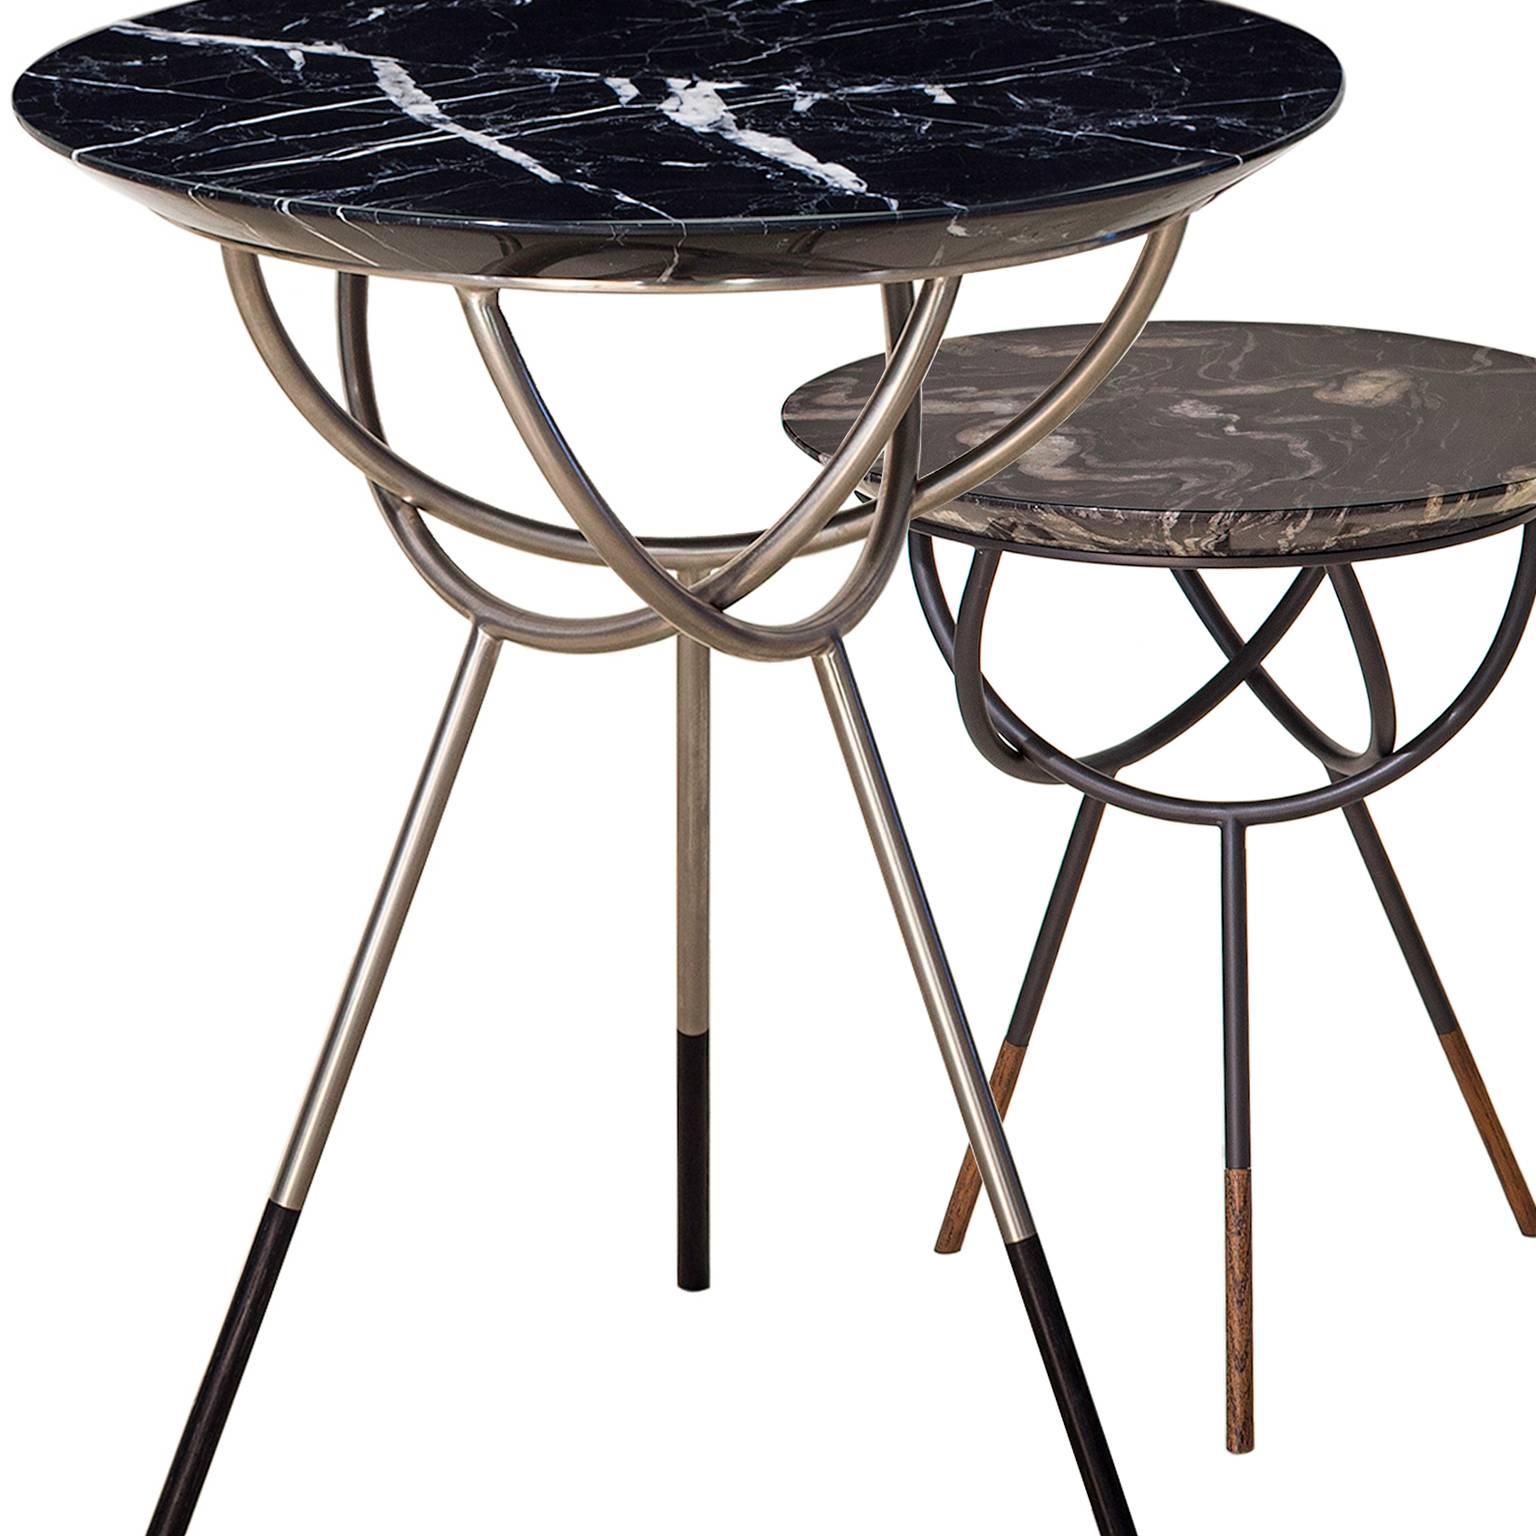 Atlas Oil-Rubbed Bronze Side Table with Black Marble Top by Avram Rusu Studio In New Condition For Sale In Brooklyn, NY